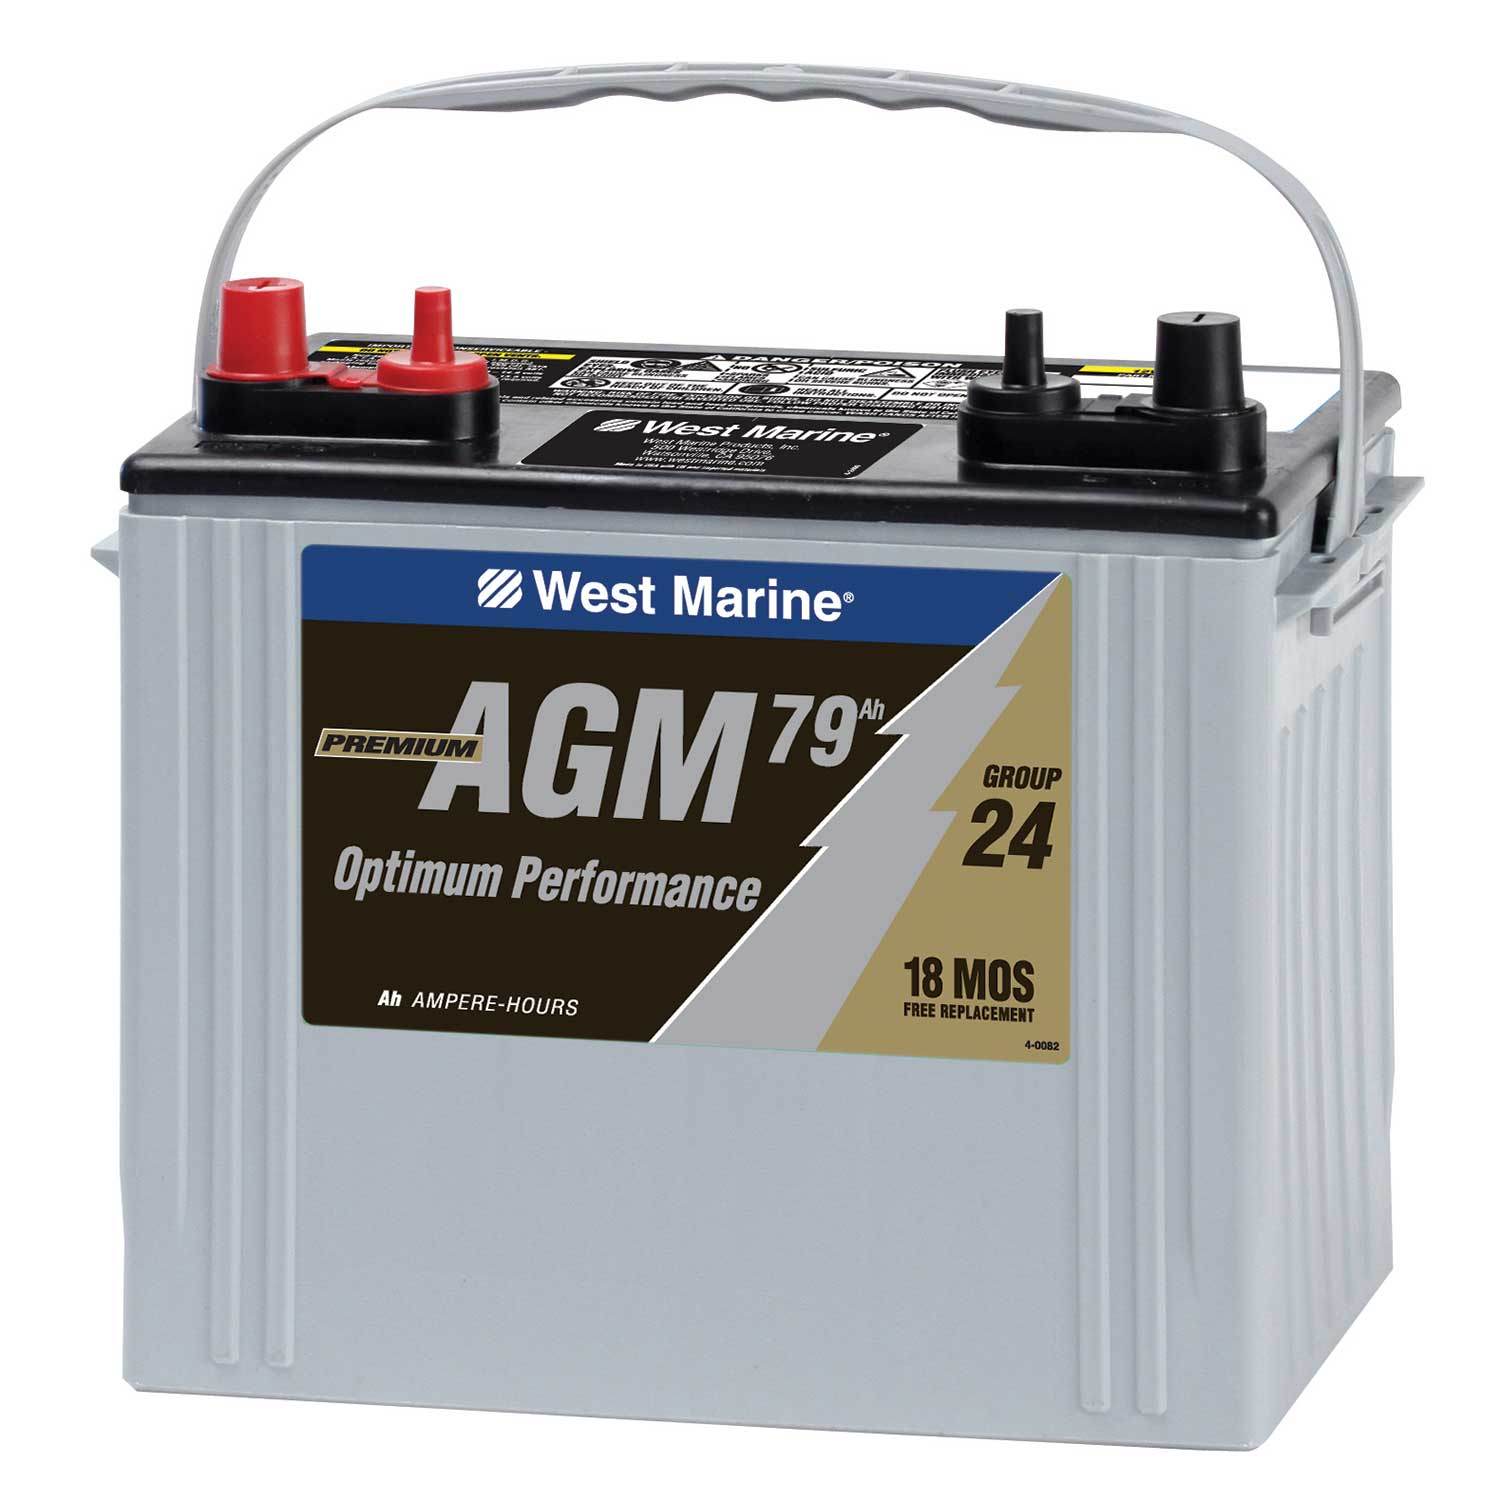 who makes west marine agm batteries